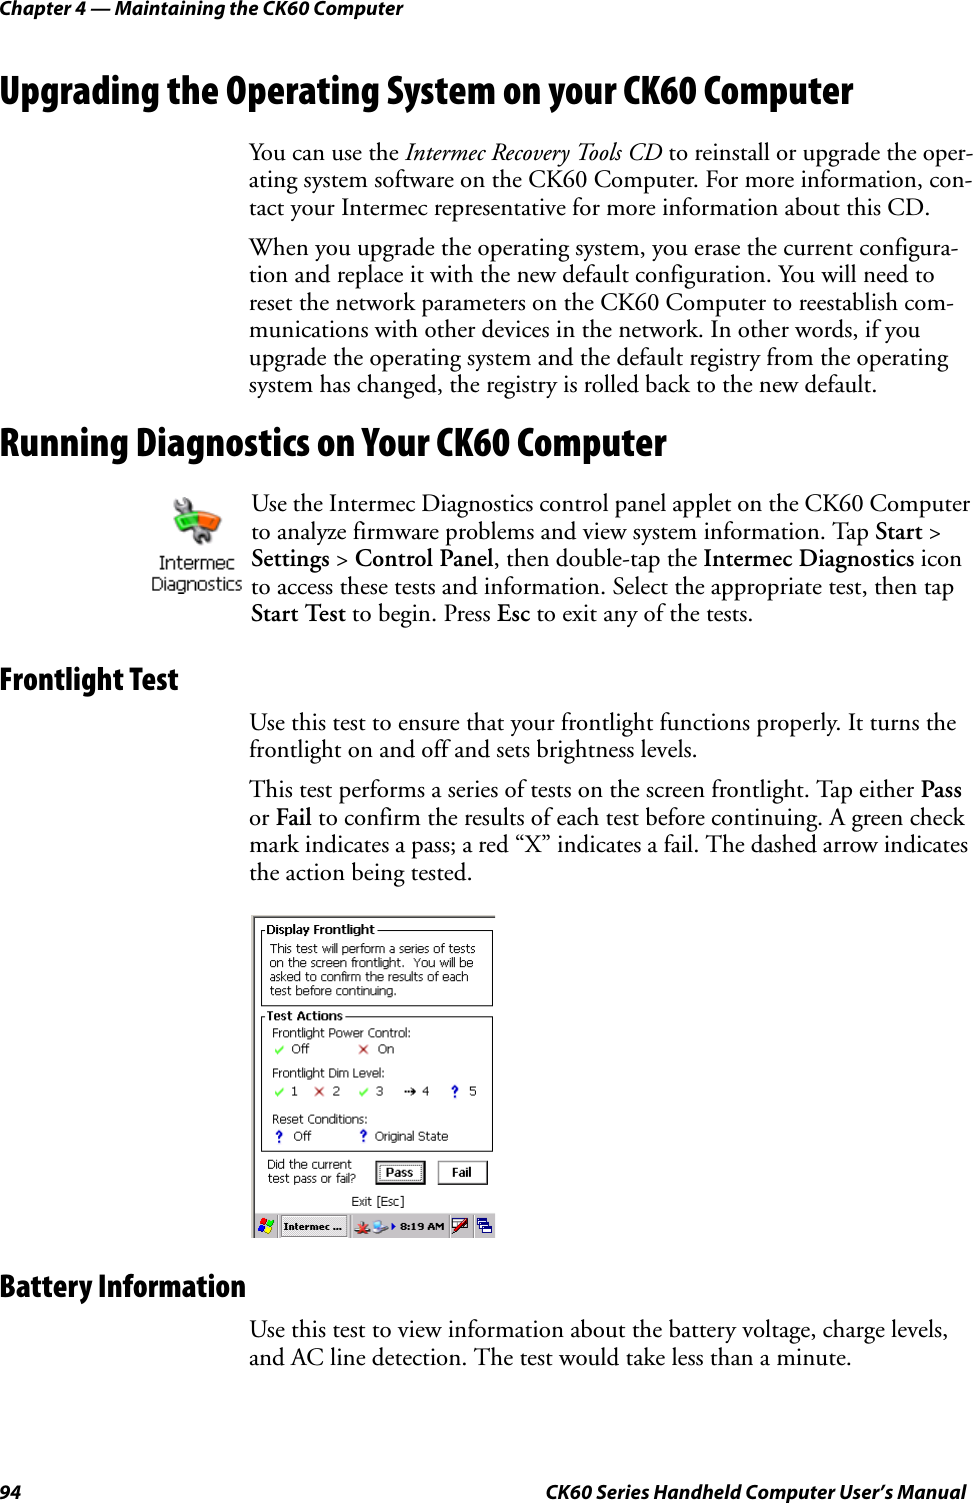 Chapter 4 — Maintaining the CK60 Computer94 CK60 Series Handheld Computer User’s ManualUpgrading the Operating System on your CK60 ComputerYou can use the Intermec Recovery Tools CD to reinstall or upgrade the oper-ating system software on the CK60 Computer. For more information, con-tact your Intermec representative for more information about this CD.When you upgrade the operating system, you erase the current configura-tion and replace it with the new default configuration. You will need to reset the network parameters on the CK60 Computer to reestablish com-munications with other devices in the network. In other words, if you upgrade the operating system and the default registry from the operating system has changed, the registry is rolled back to the new default.Running Diagnostics on Your CK60 ComputerFrontlight TestUse this test to ensure that your frontlight functions properly. It turns the frontlight on and off and sets brightness levels.This test performs a series of tests on the screen frontlight. Tap either Pass or Fail to confirm the results of each test before continuing. A green check mark indicates a pass; a red “X” indicates a fail. The dashed arrow indicates the action being tested.Battery InformationUse this test to view information about the battery voltage, charge levels, and AC line detection. The test would take less than a minute.Use the Intermec Diagnostics control panel applet on the CK60 Computer to analyze firmware problems and view system information. Tap Start &gt; Settings &gt; Control Panel, then double-tap the Intermec Diagnostics icon to access these tests and information. Select the appropriate test, then tap Start Test to begin. Press Esc to exit any of the tests.